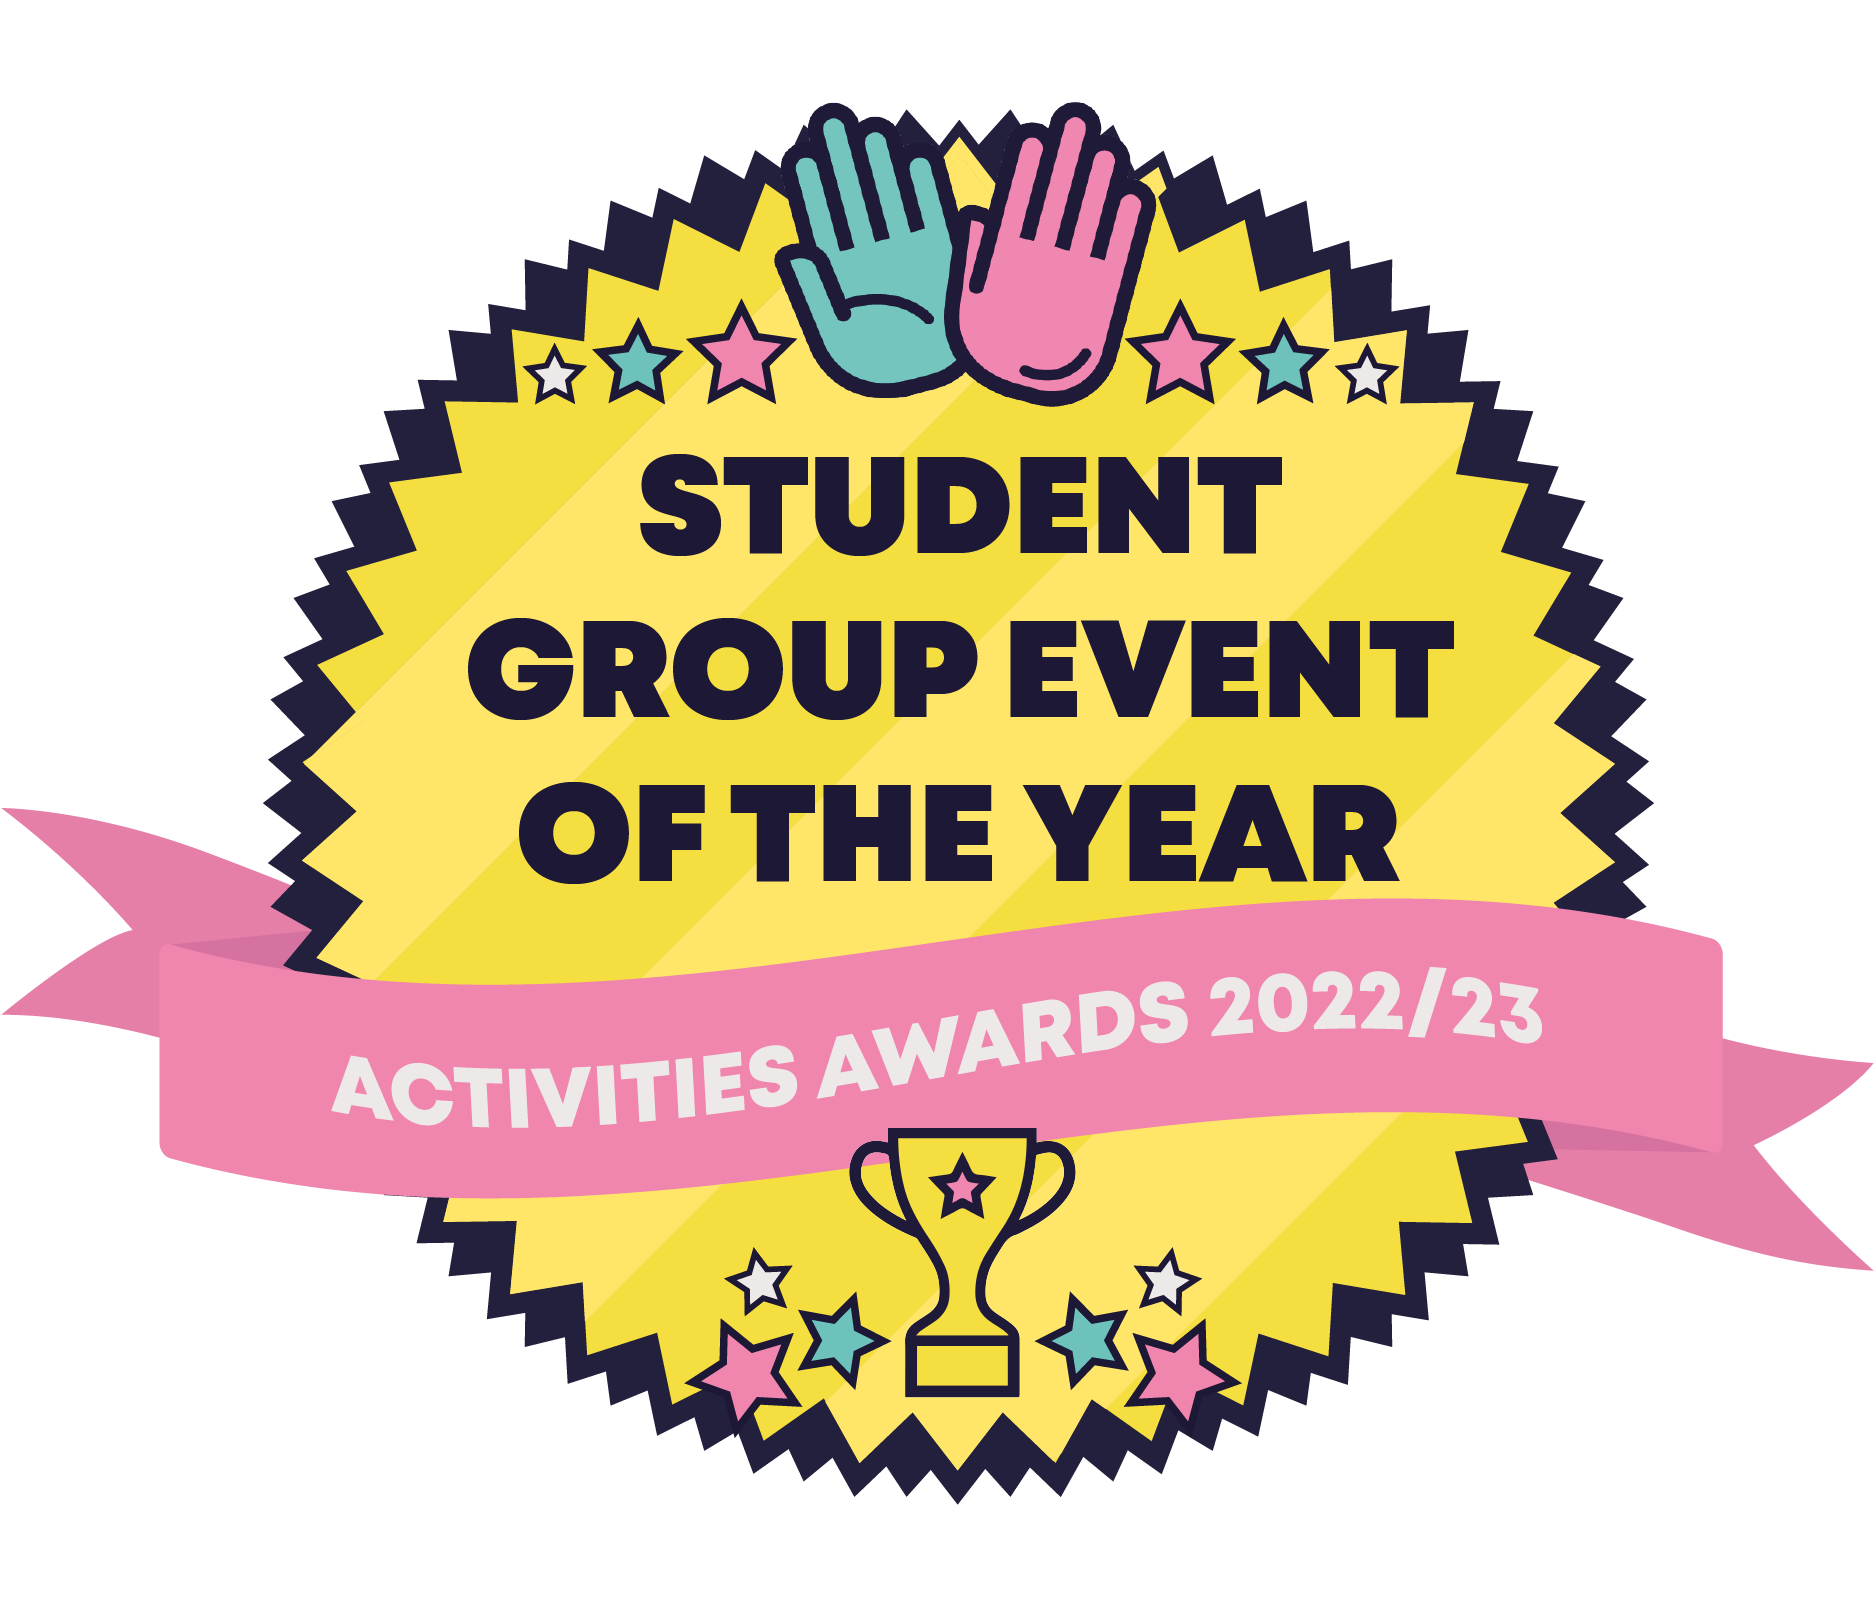 Student Group Event of the Year